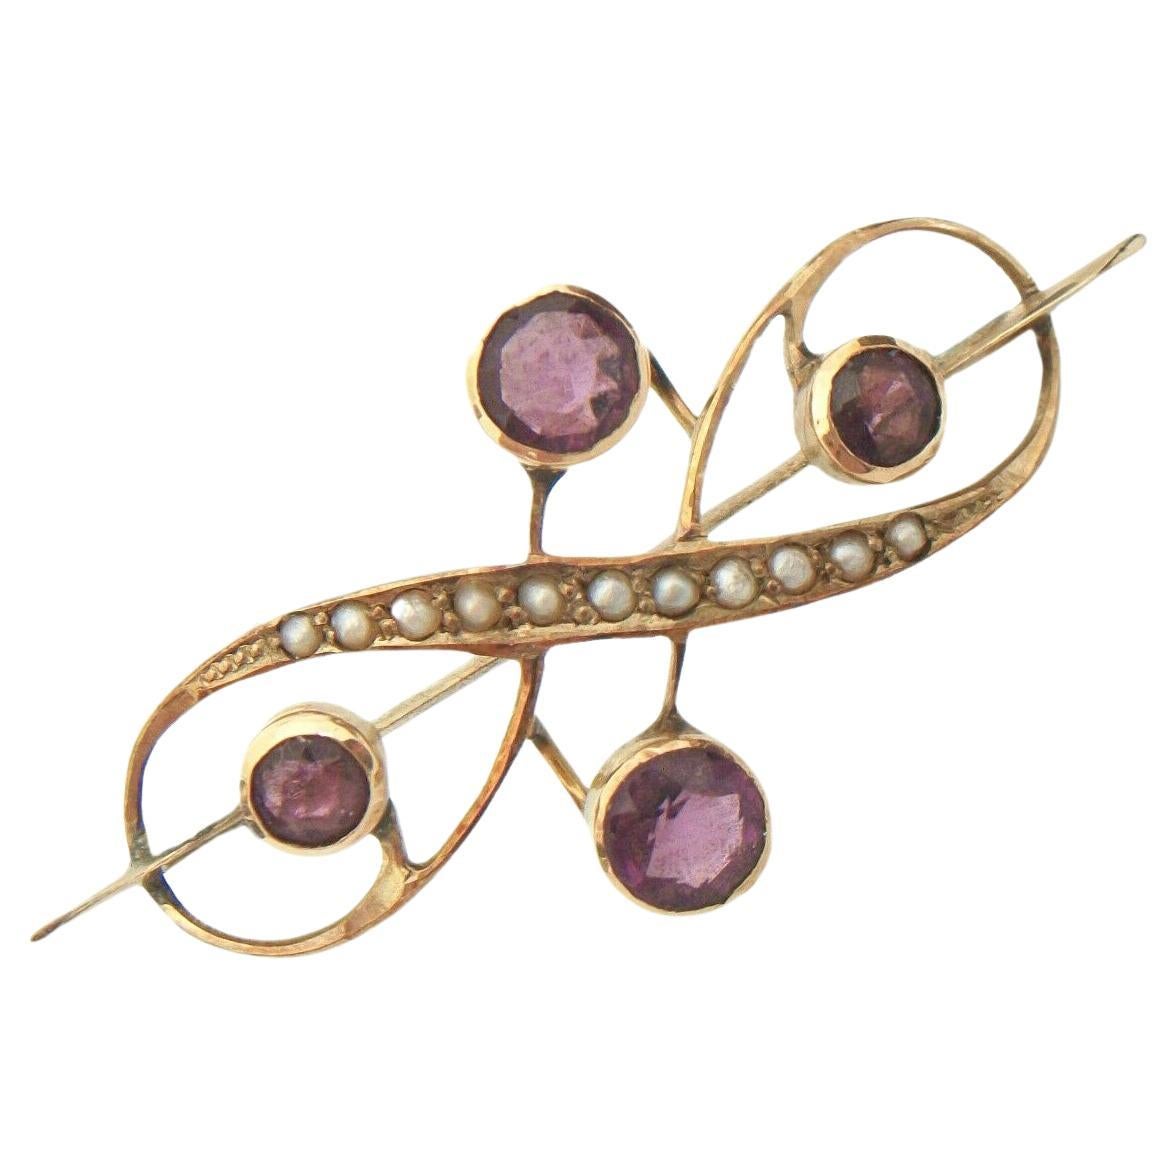 Art Nouveau Amethyst Paste & Seed Pearl Brooch - 10K Gold - Signed - C. 1930's